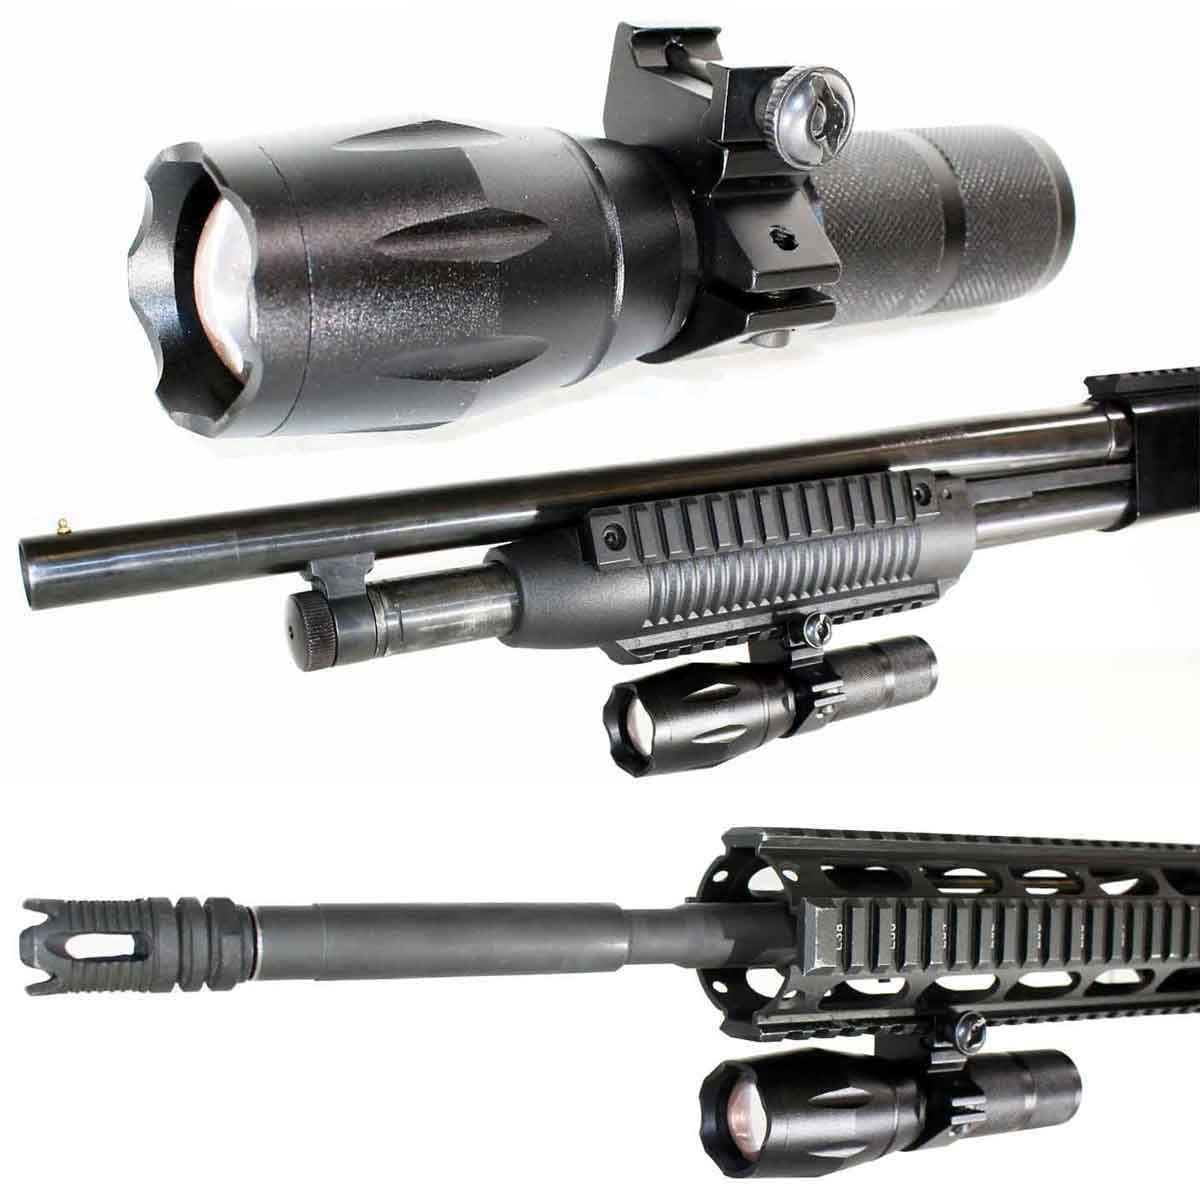 Tactical 1200 Lumen Rechargeable Picatinny Mounted Flashlight Compatible With Rifles. - TRINITY SUPPLY INC